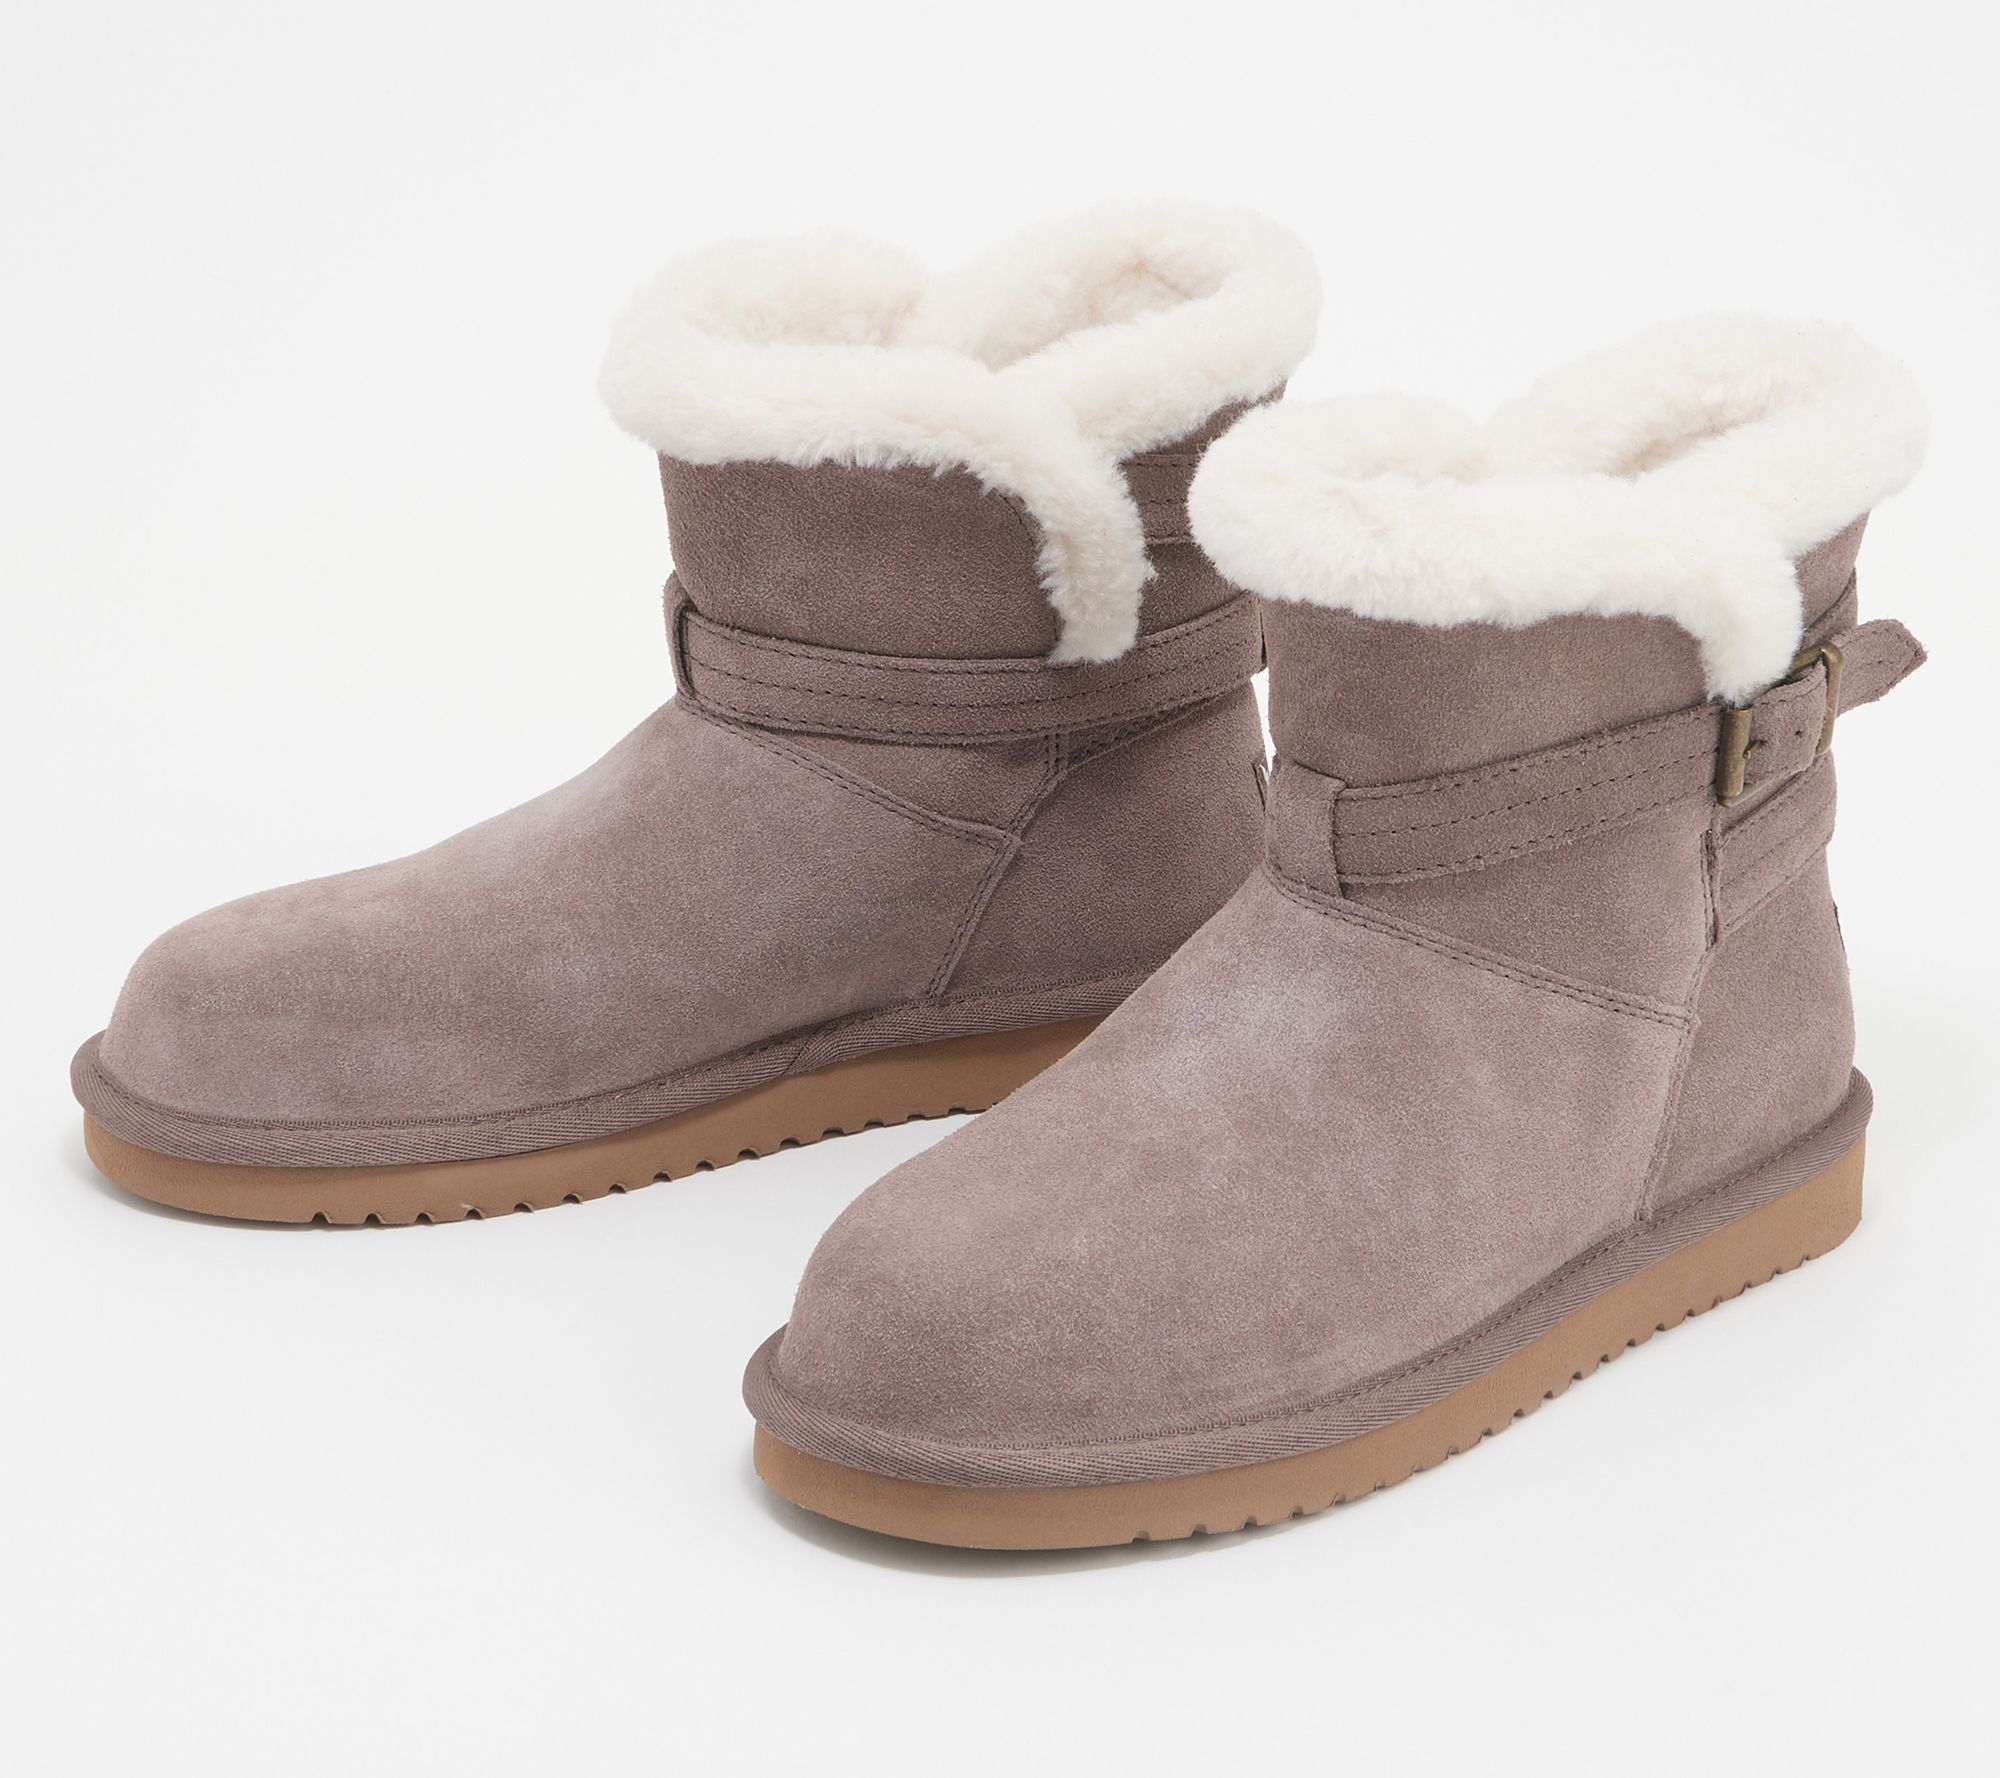 Target Has So Many Ugg-Inspired Boots On Sale Right Now & Prices